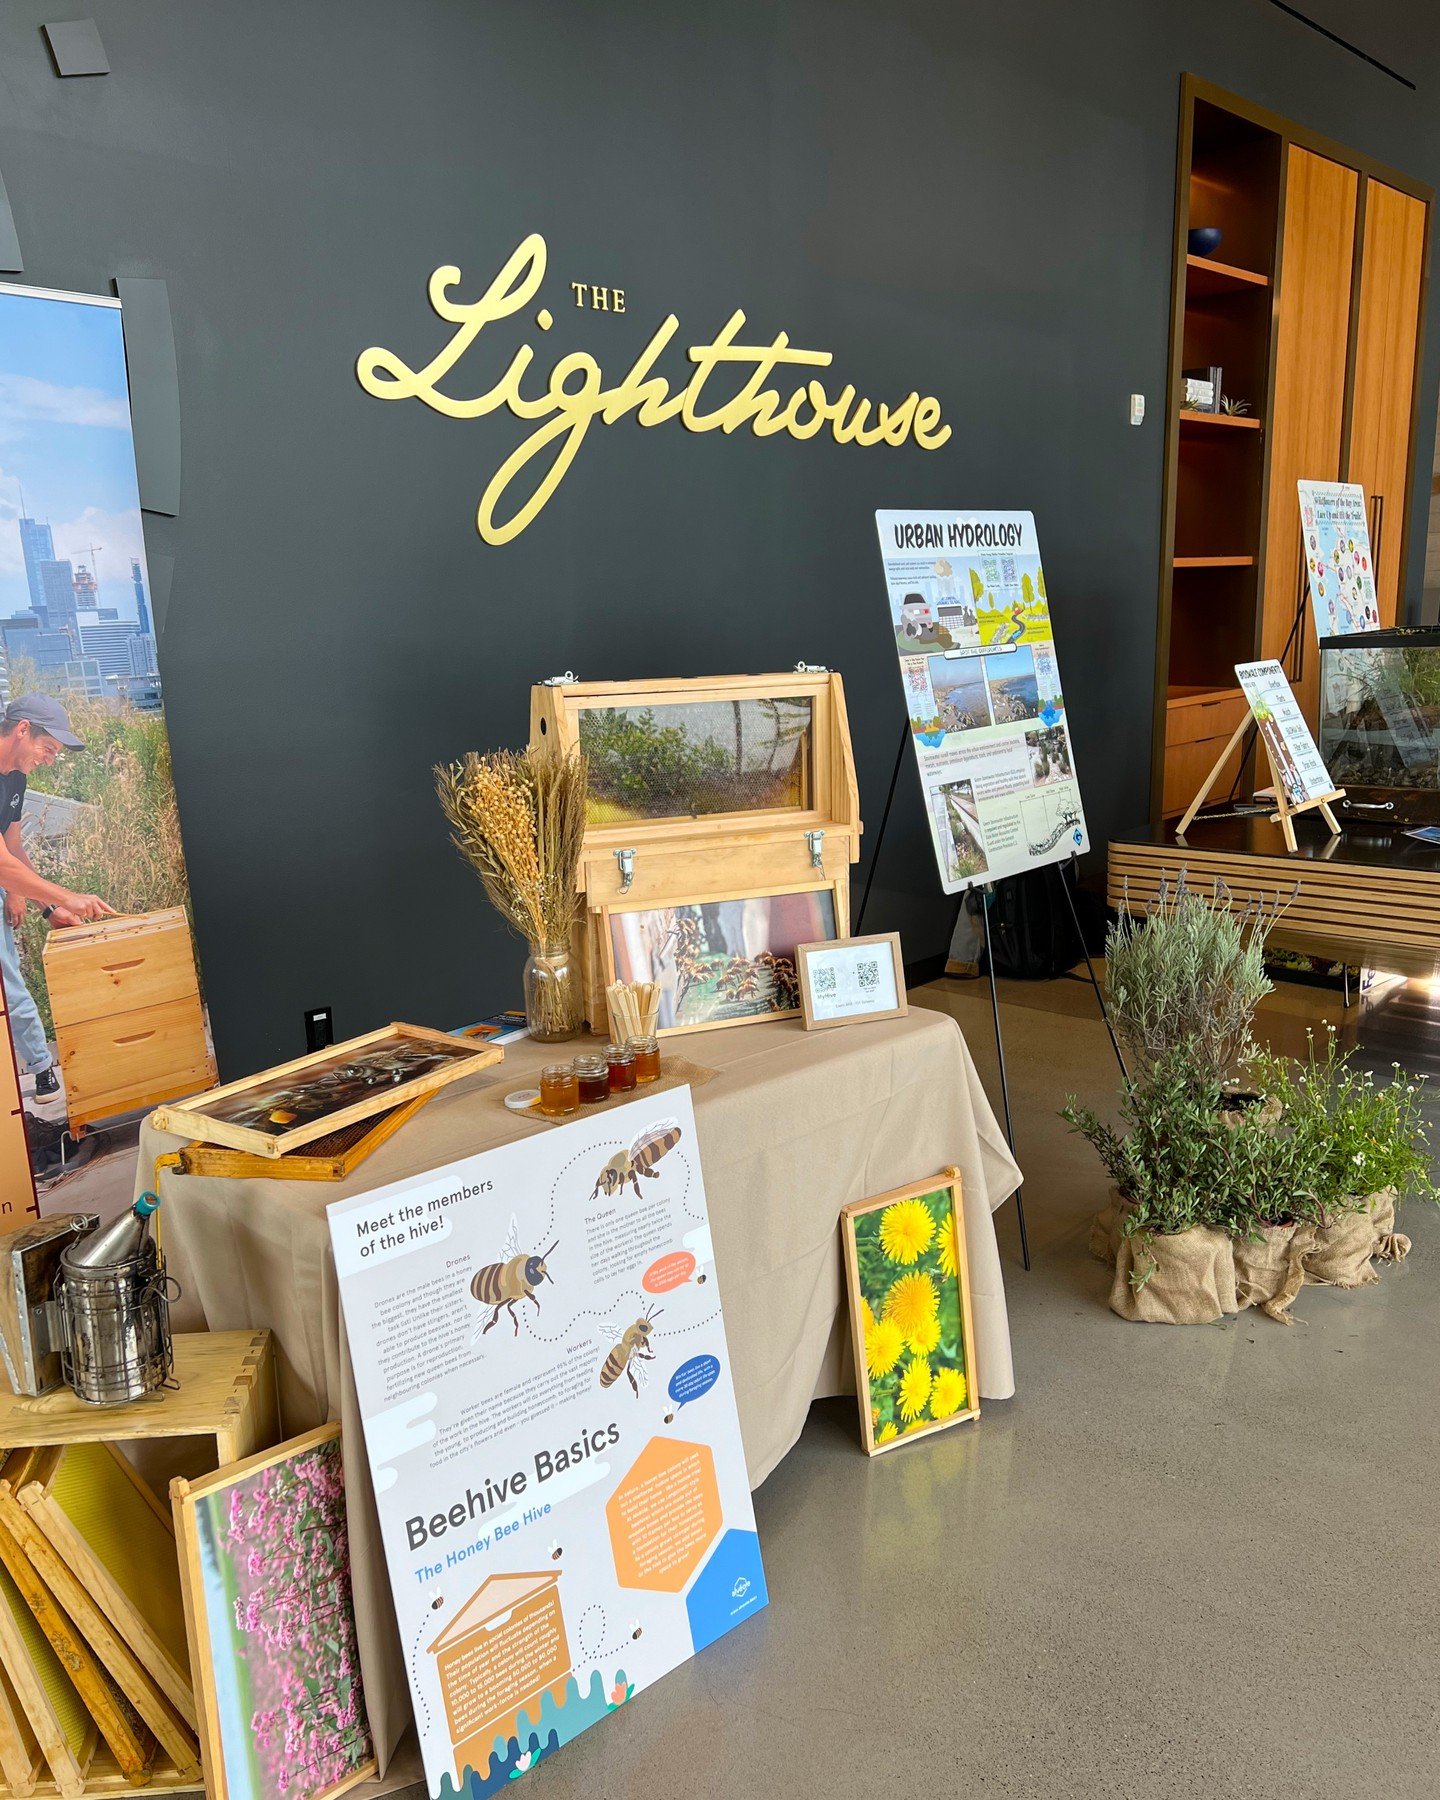 Earth Day at The Lighthouse! 🌎🌱

Our tenant event was buzzing with activity, featuring locally sourced honey from The Lighthouse hive, plant-based treats made by our culinary team, and sweet-take home succulents. Thank you to our beekeepers and Got